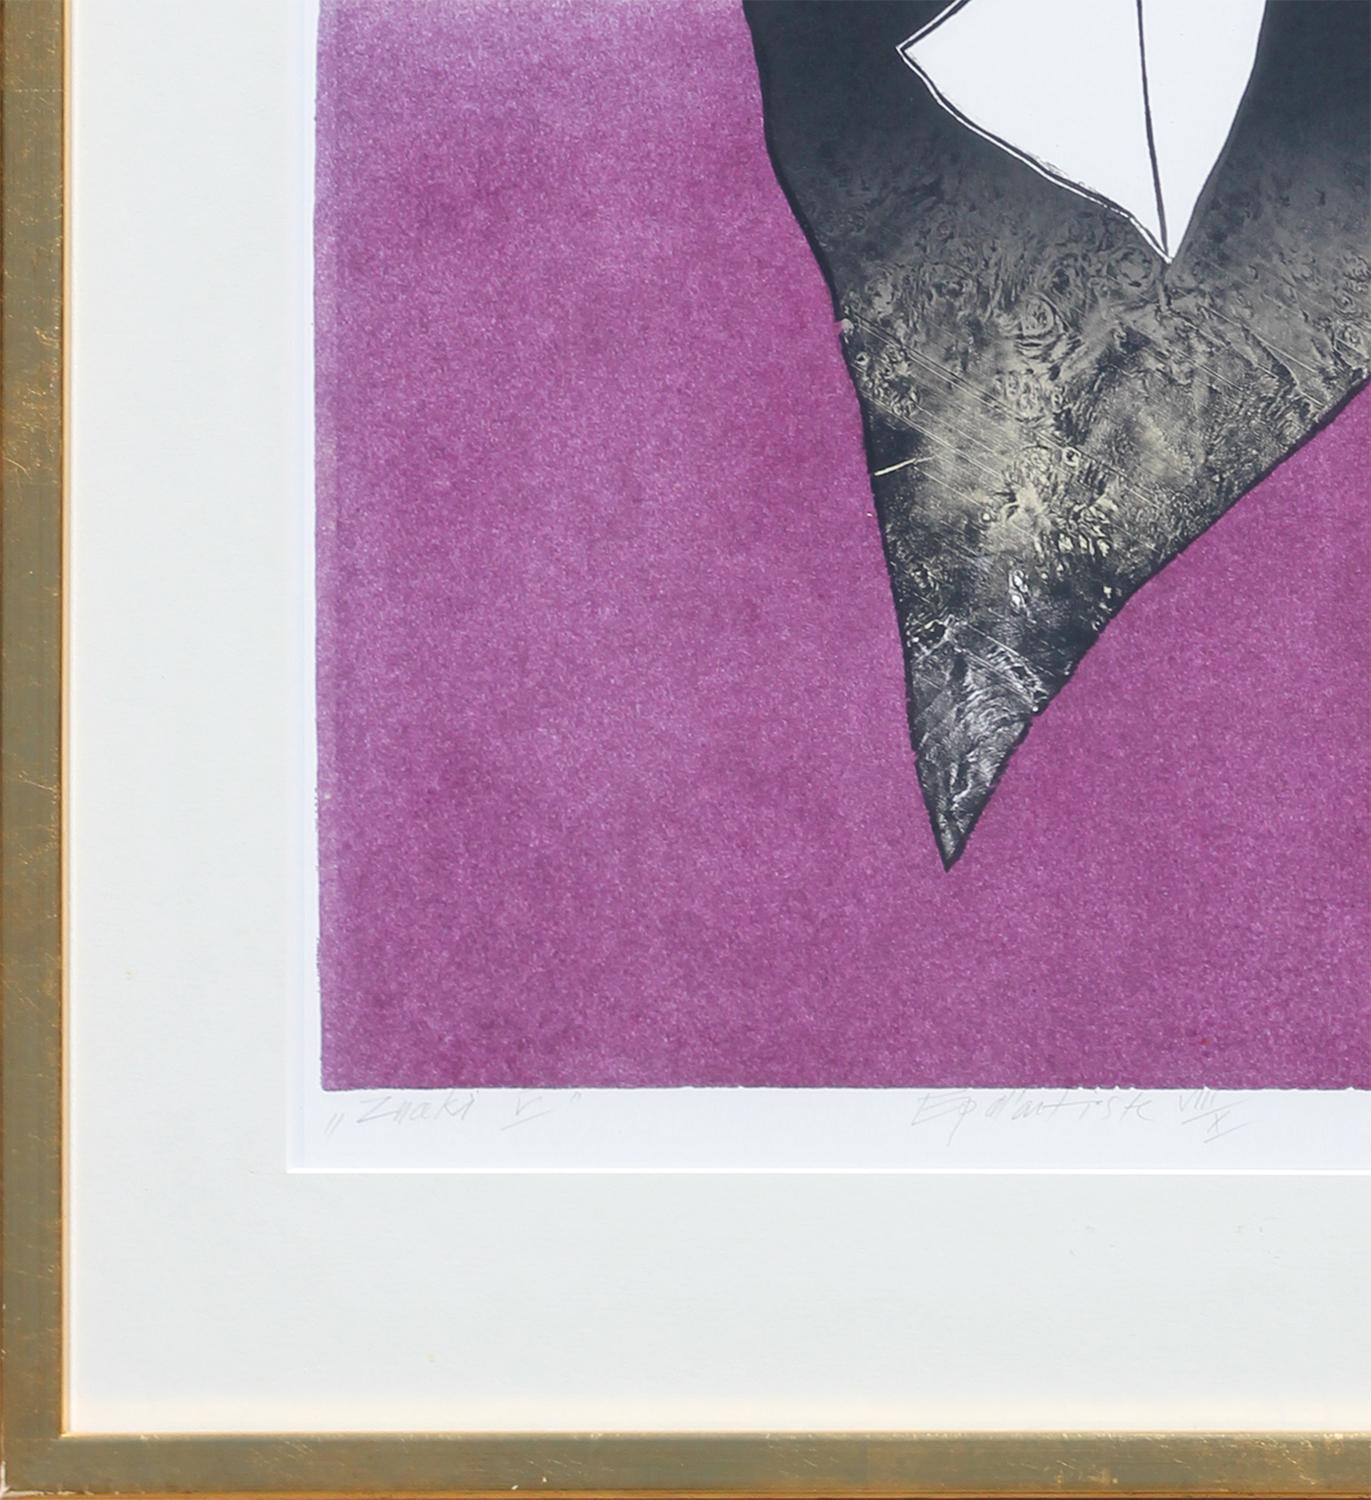 Modern purple and black minimalist woodcut print by Polish artist, Zbigniew Lutomski. This print depicts a black abstracted geometric shape set against a rich purple background. Signed, titled, dated, and editioned by the artist along the font lower